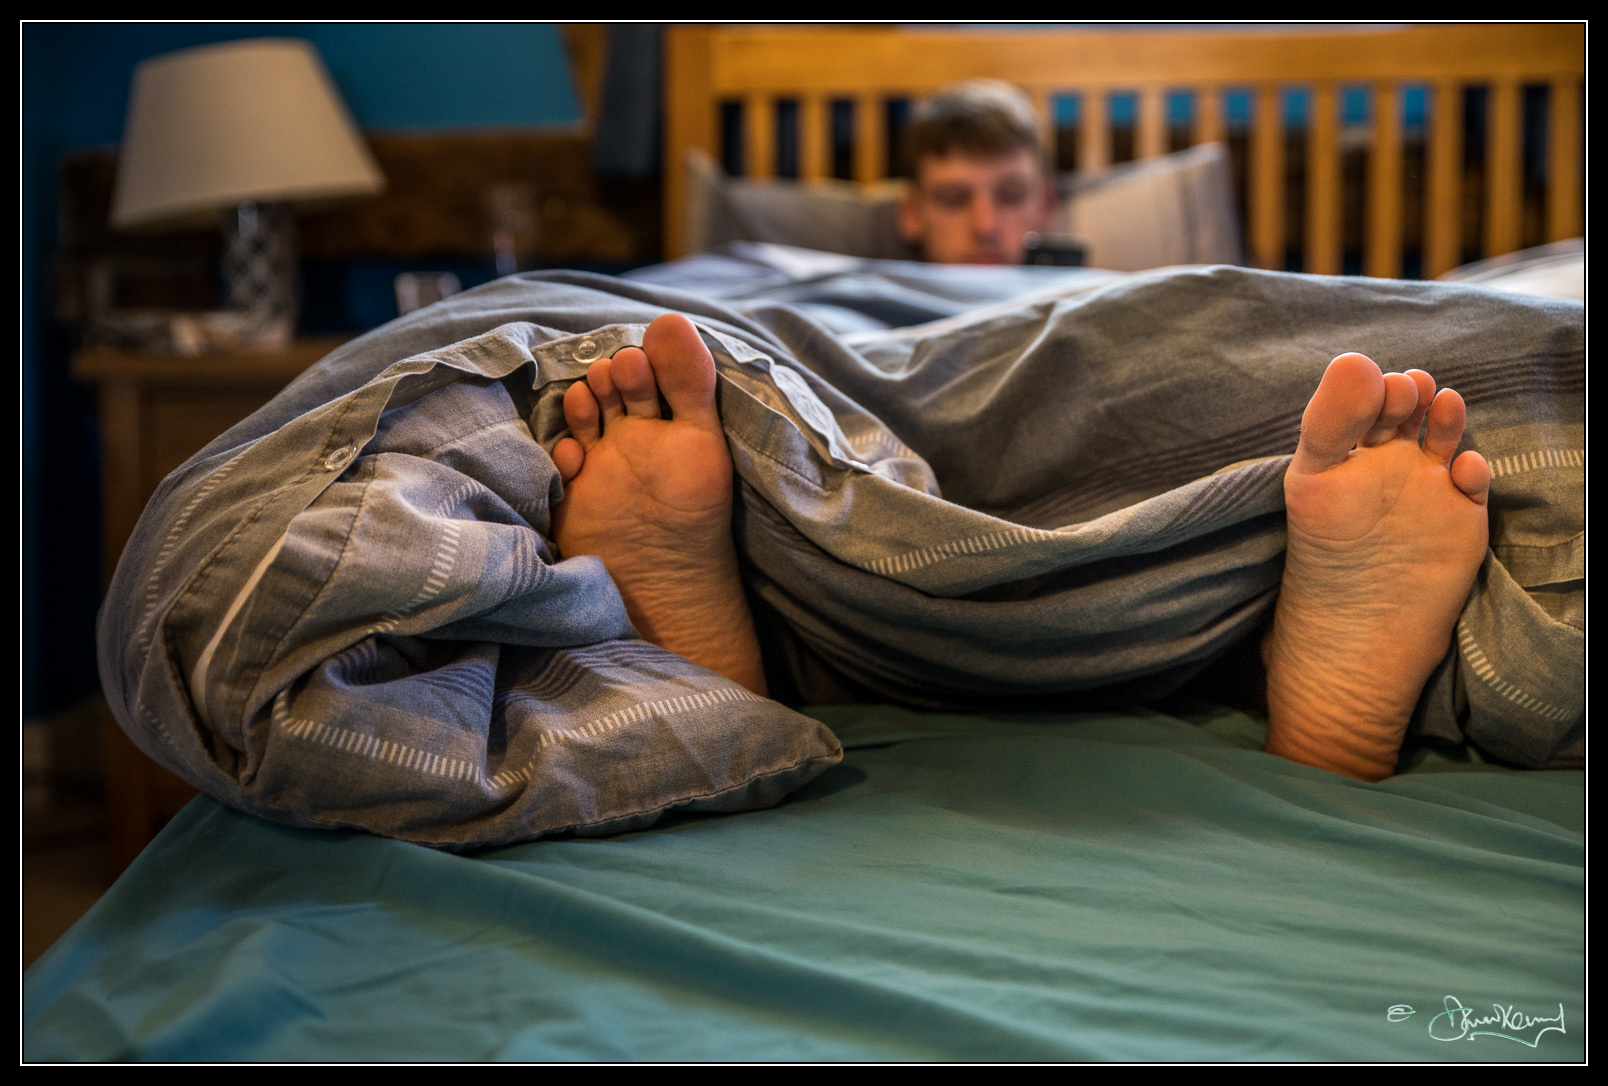 These Feet Were Made for Lounging, David Kessel